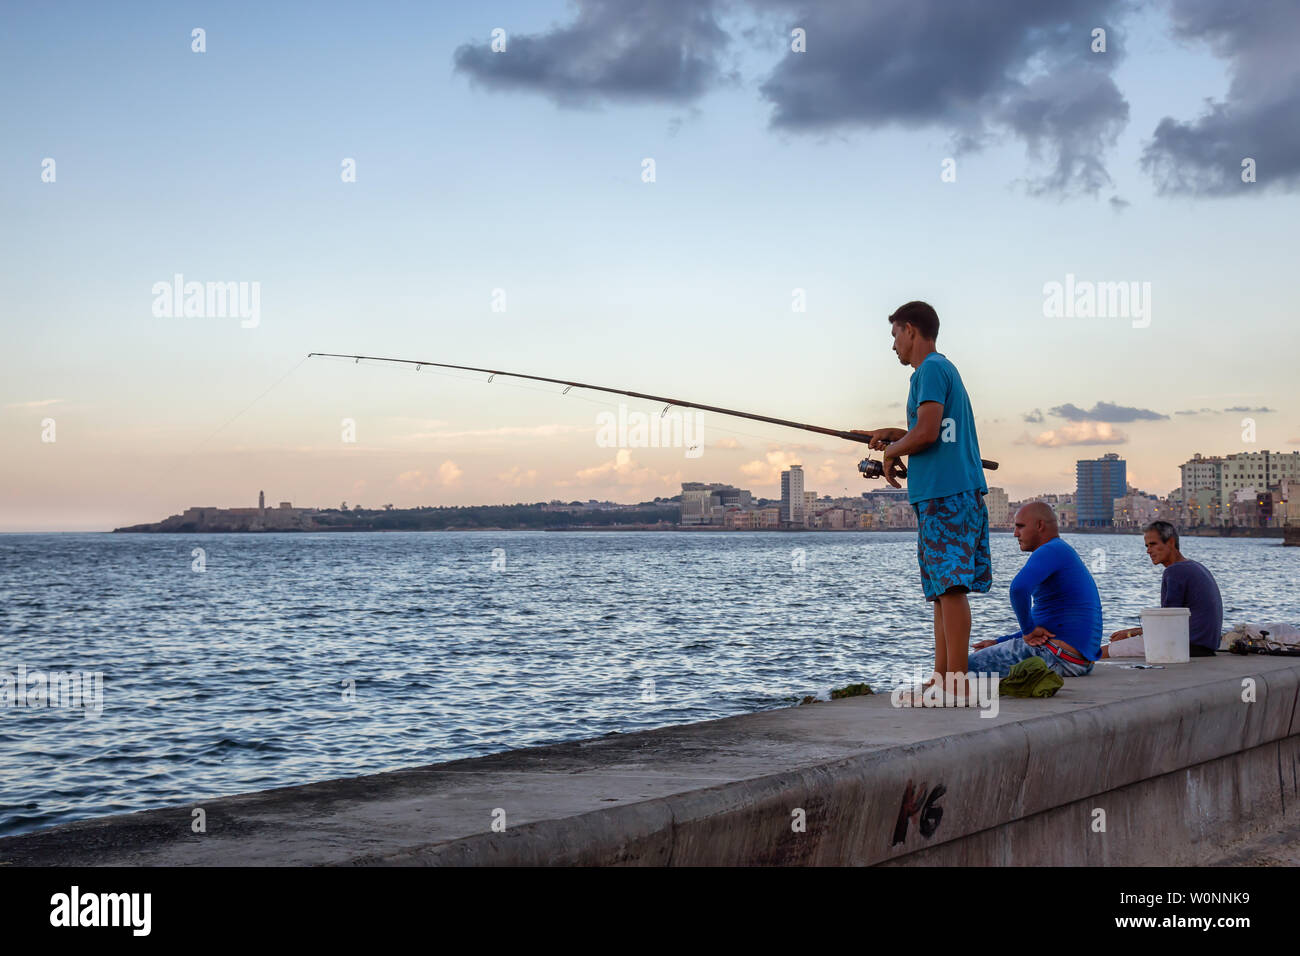 Havana, Cuba - May 12, 2019: Cuban people are fishing in the ocean, taken during the Shortage of Food Crisis. Stock Photo